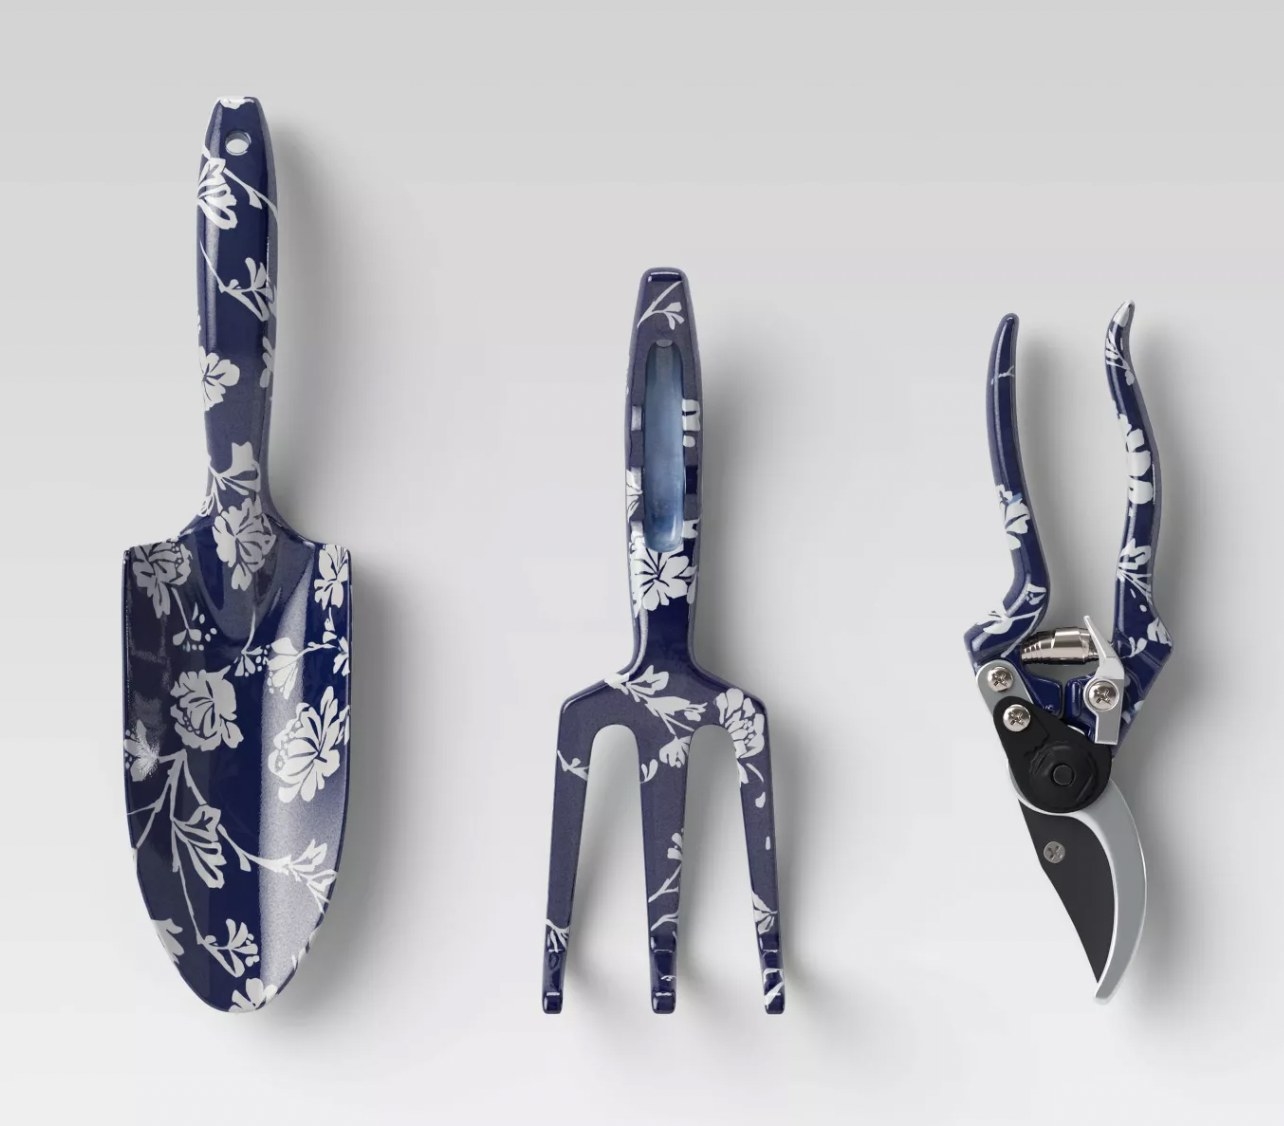 a navy and white garden tool set with a garden trowel, cultivator and secateurs